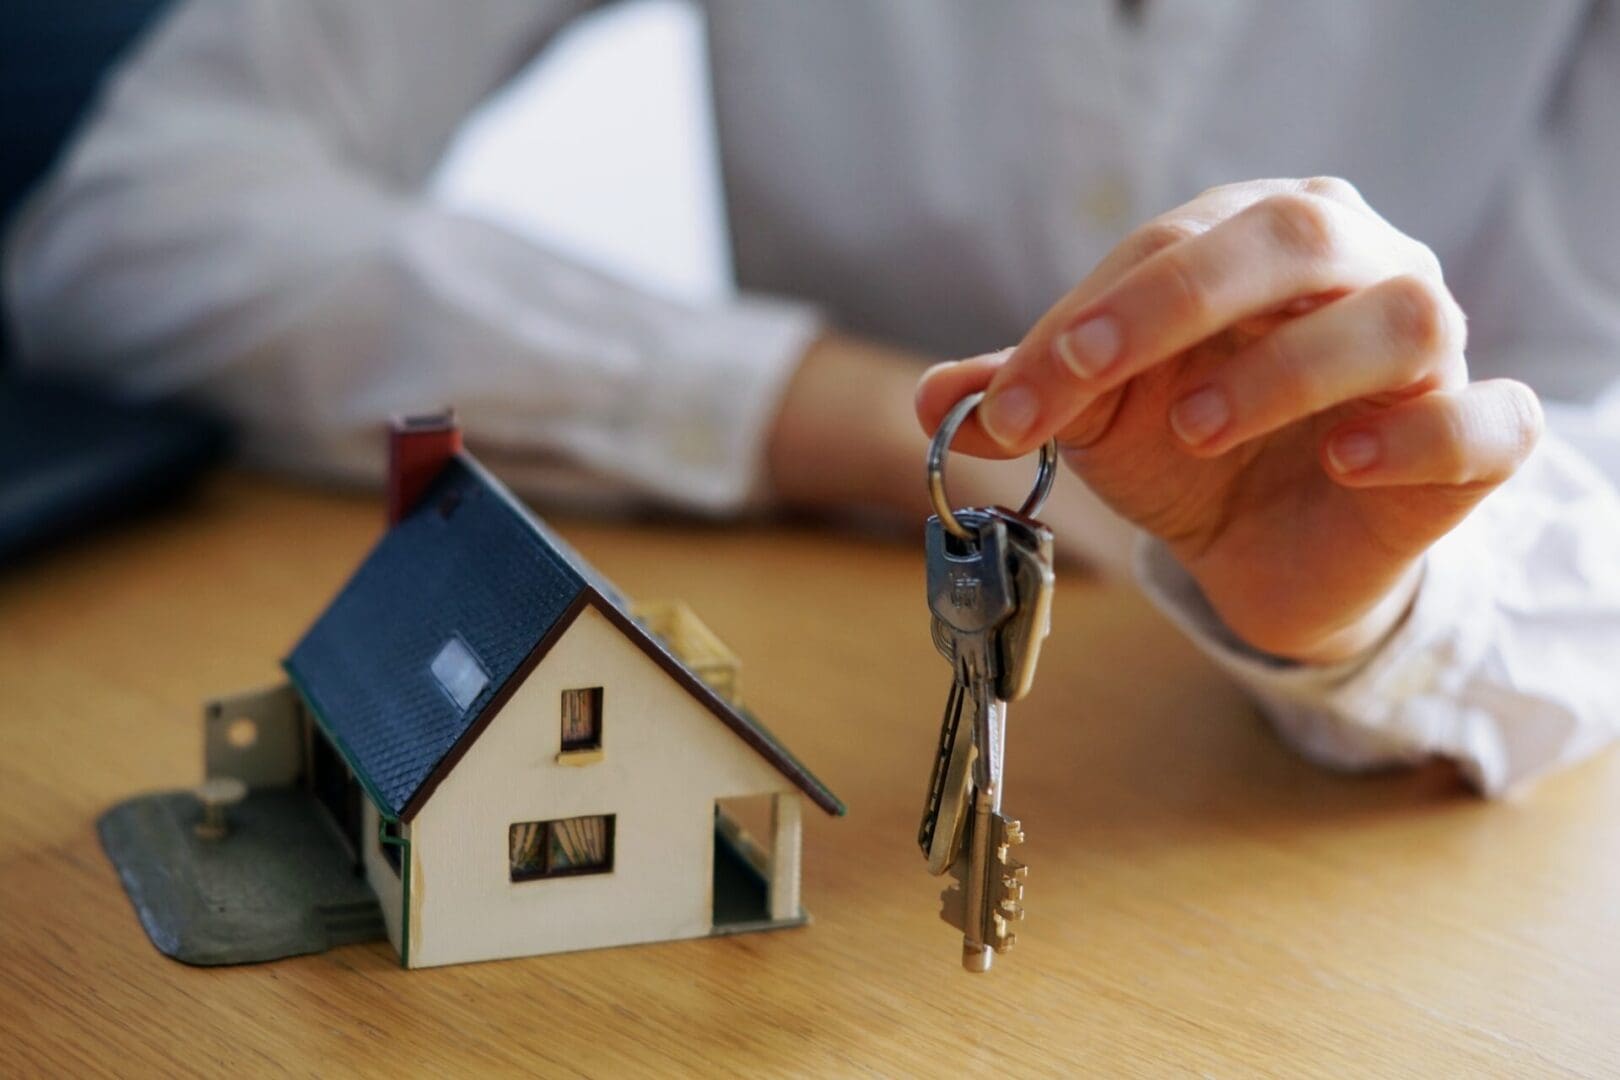 Person holding a set of keys next to a miniature house model, symbolizing Islamic leasing or real estate transaction.